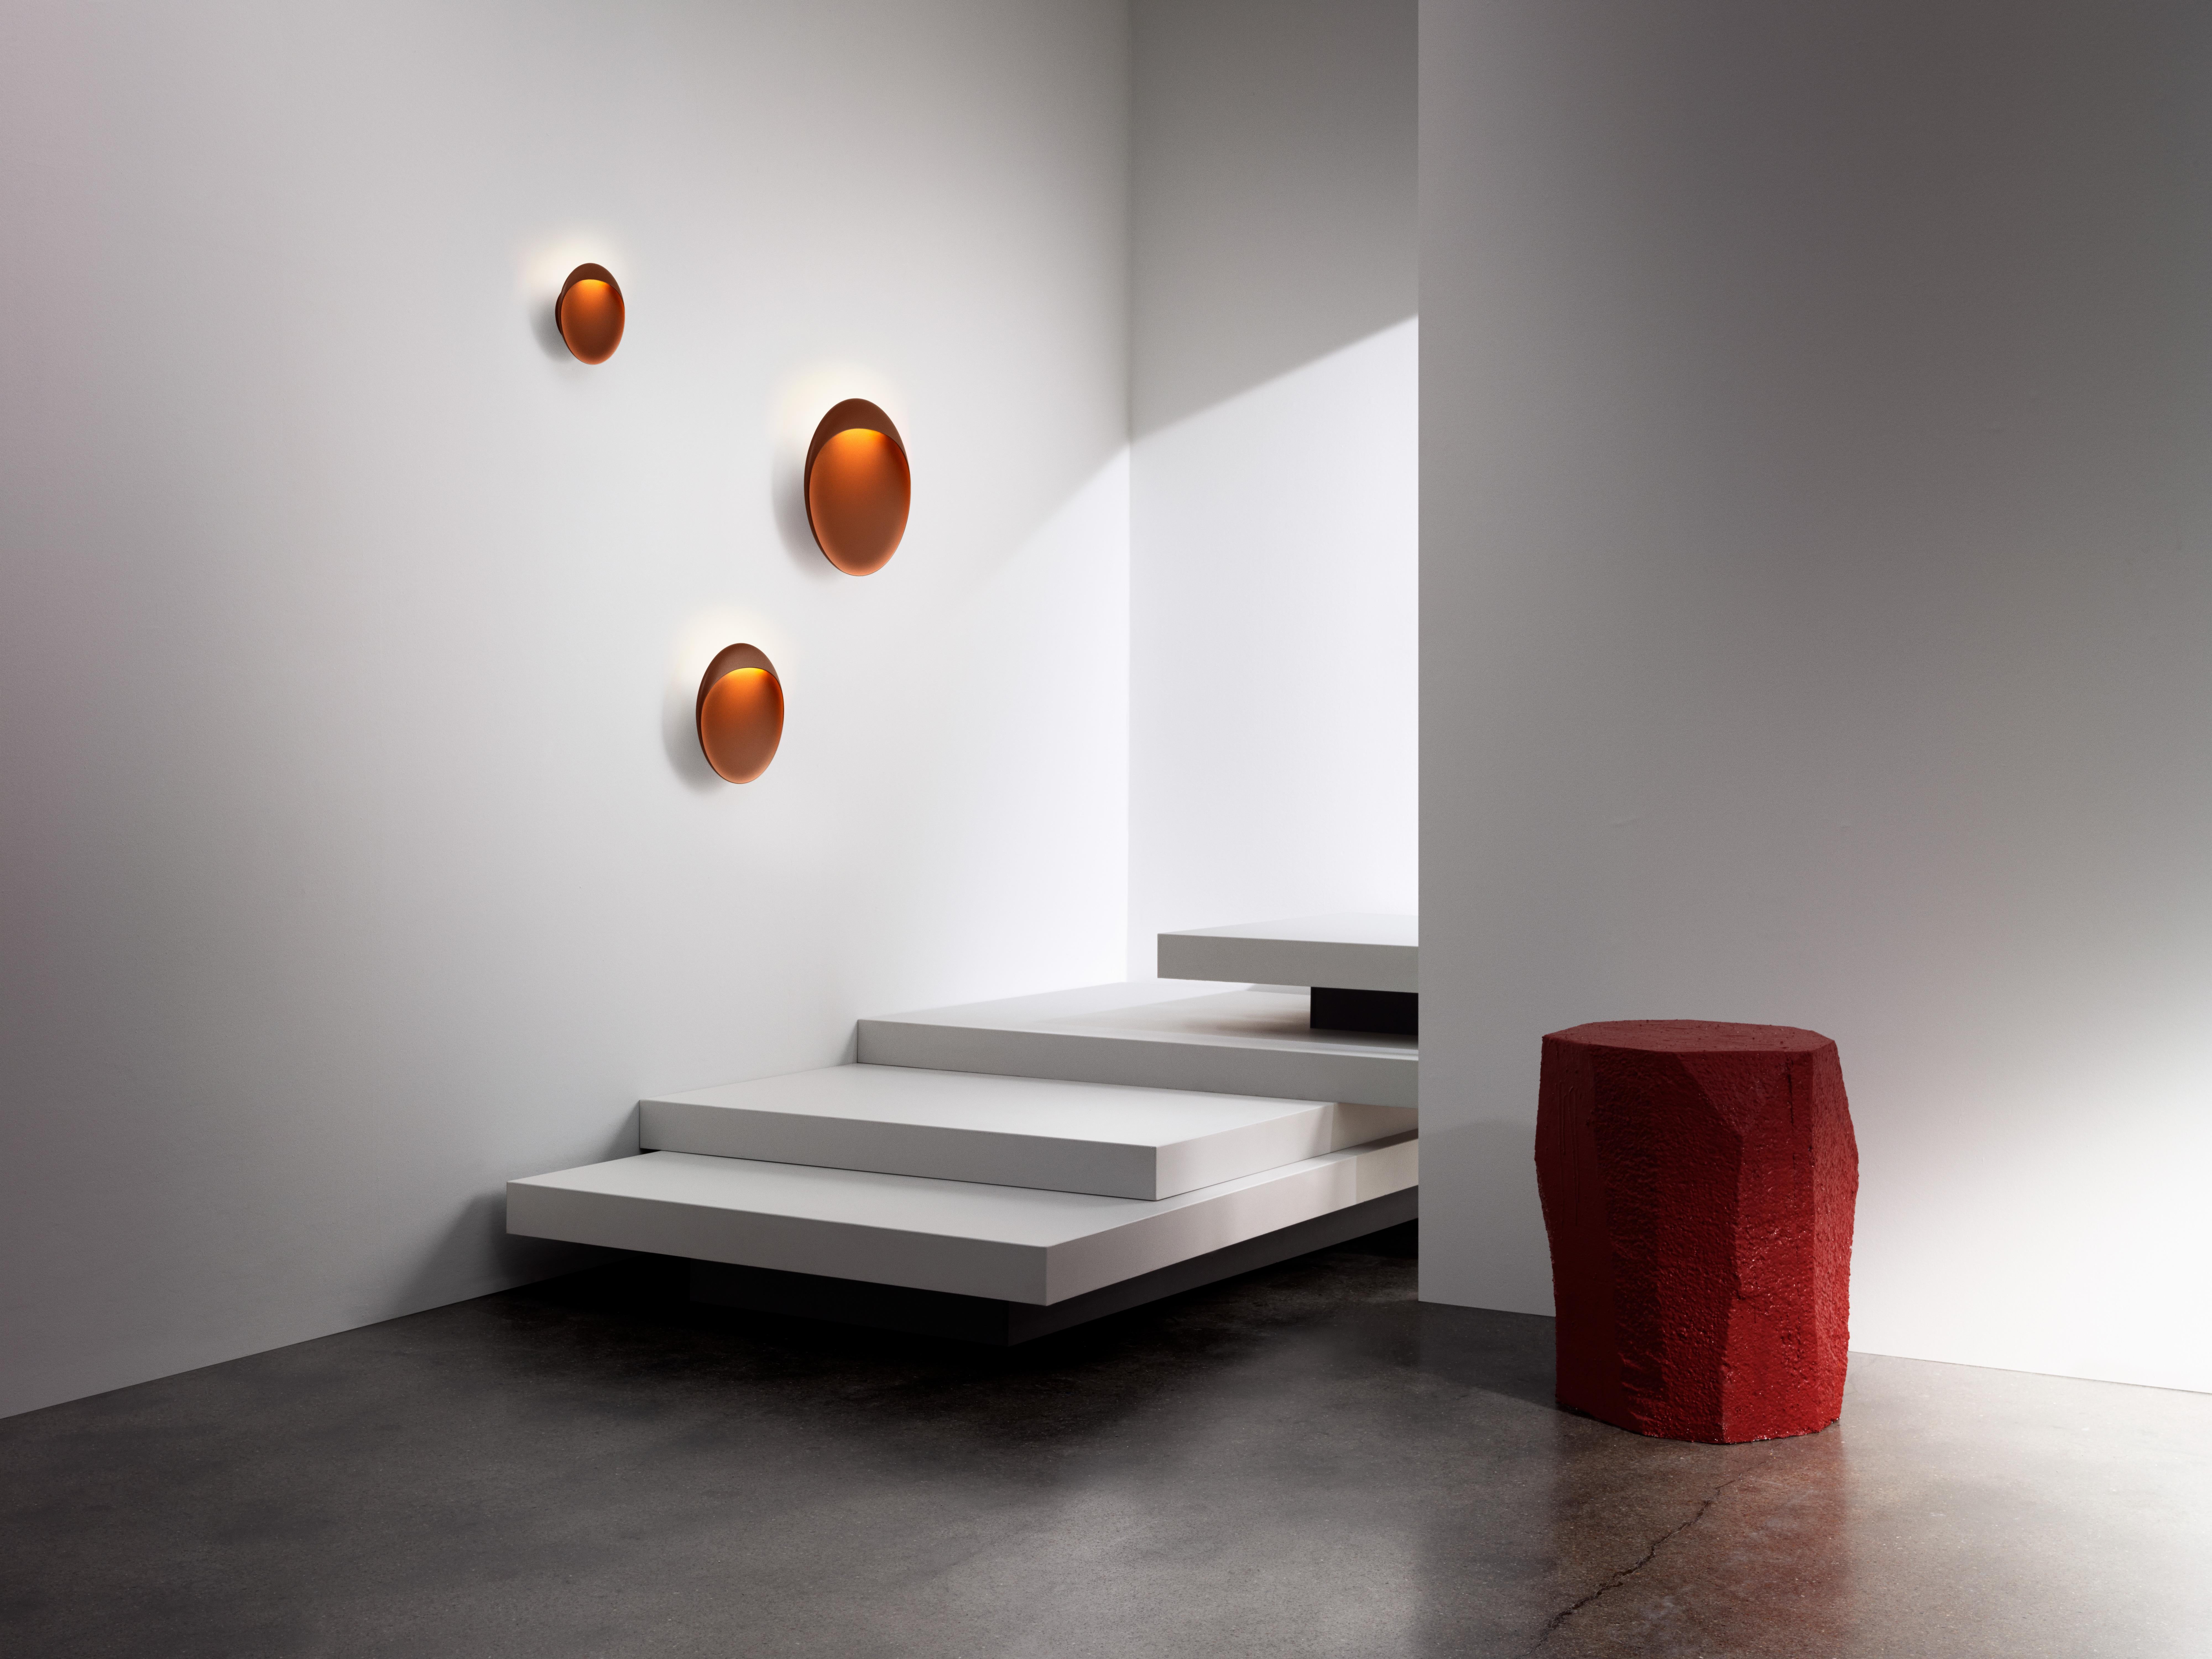 Large 'Flindt' indoor/outdoor wall light in Cortens Red for Louis Poulsen. A circular, wall-mounted fixture that brings bold, sculptural illumination to both indoor and outdoor spaces. The slim, elliptical lamp has a floating appearance that, paired